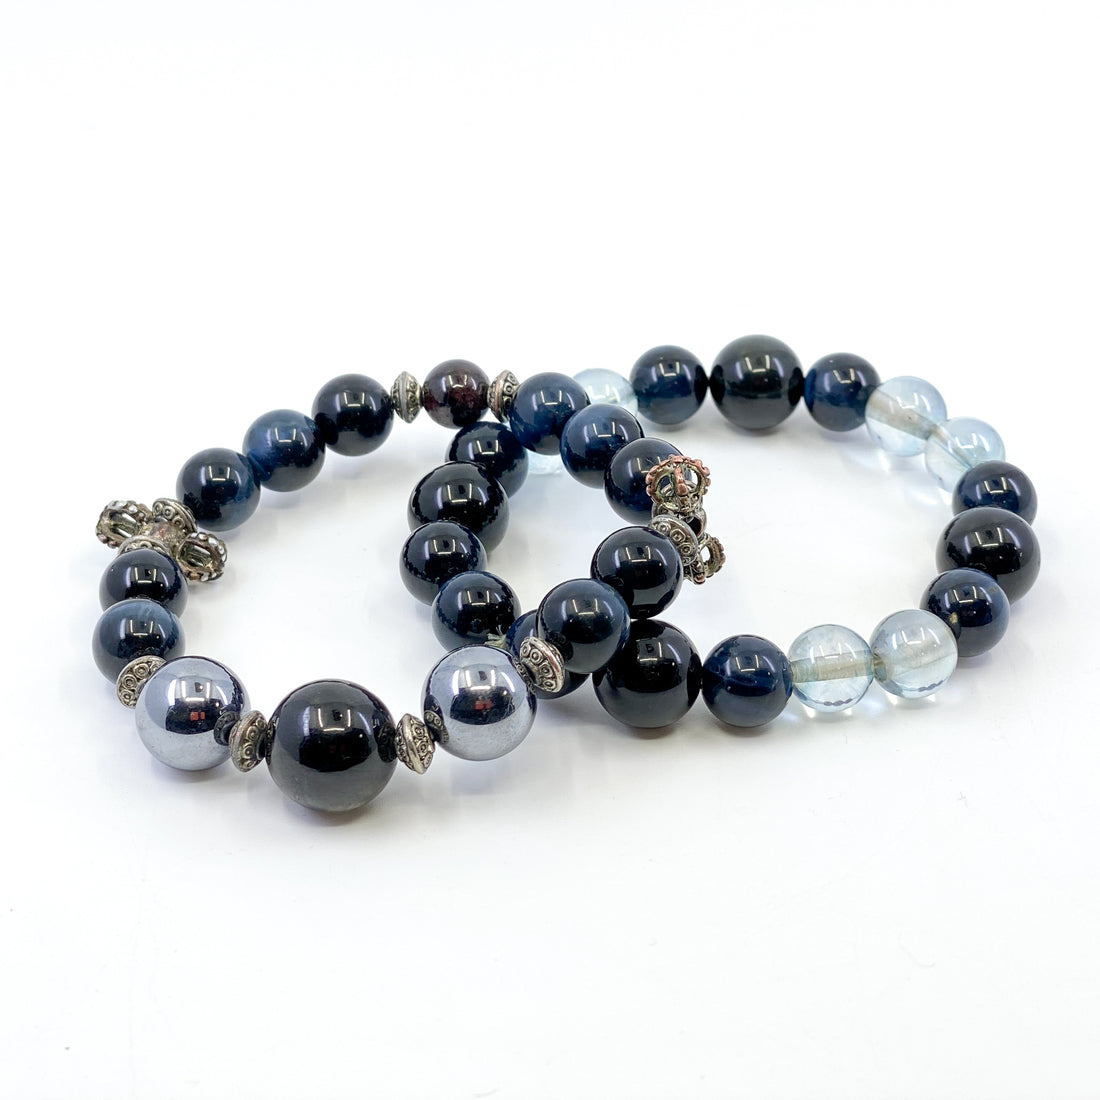 Black Beads at The Bead Gallery!